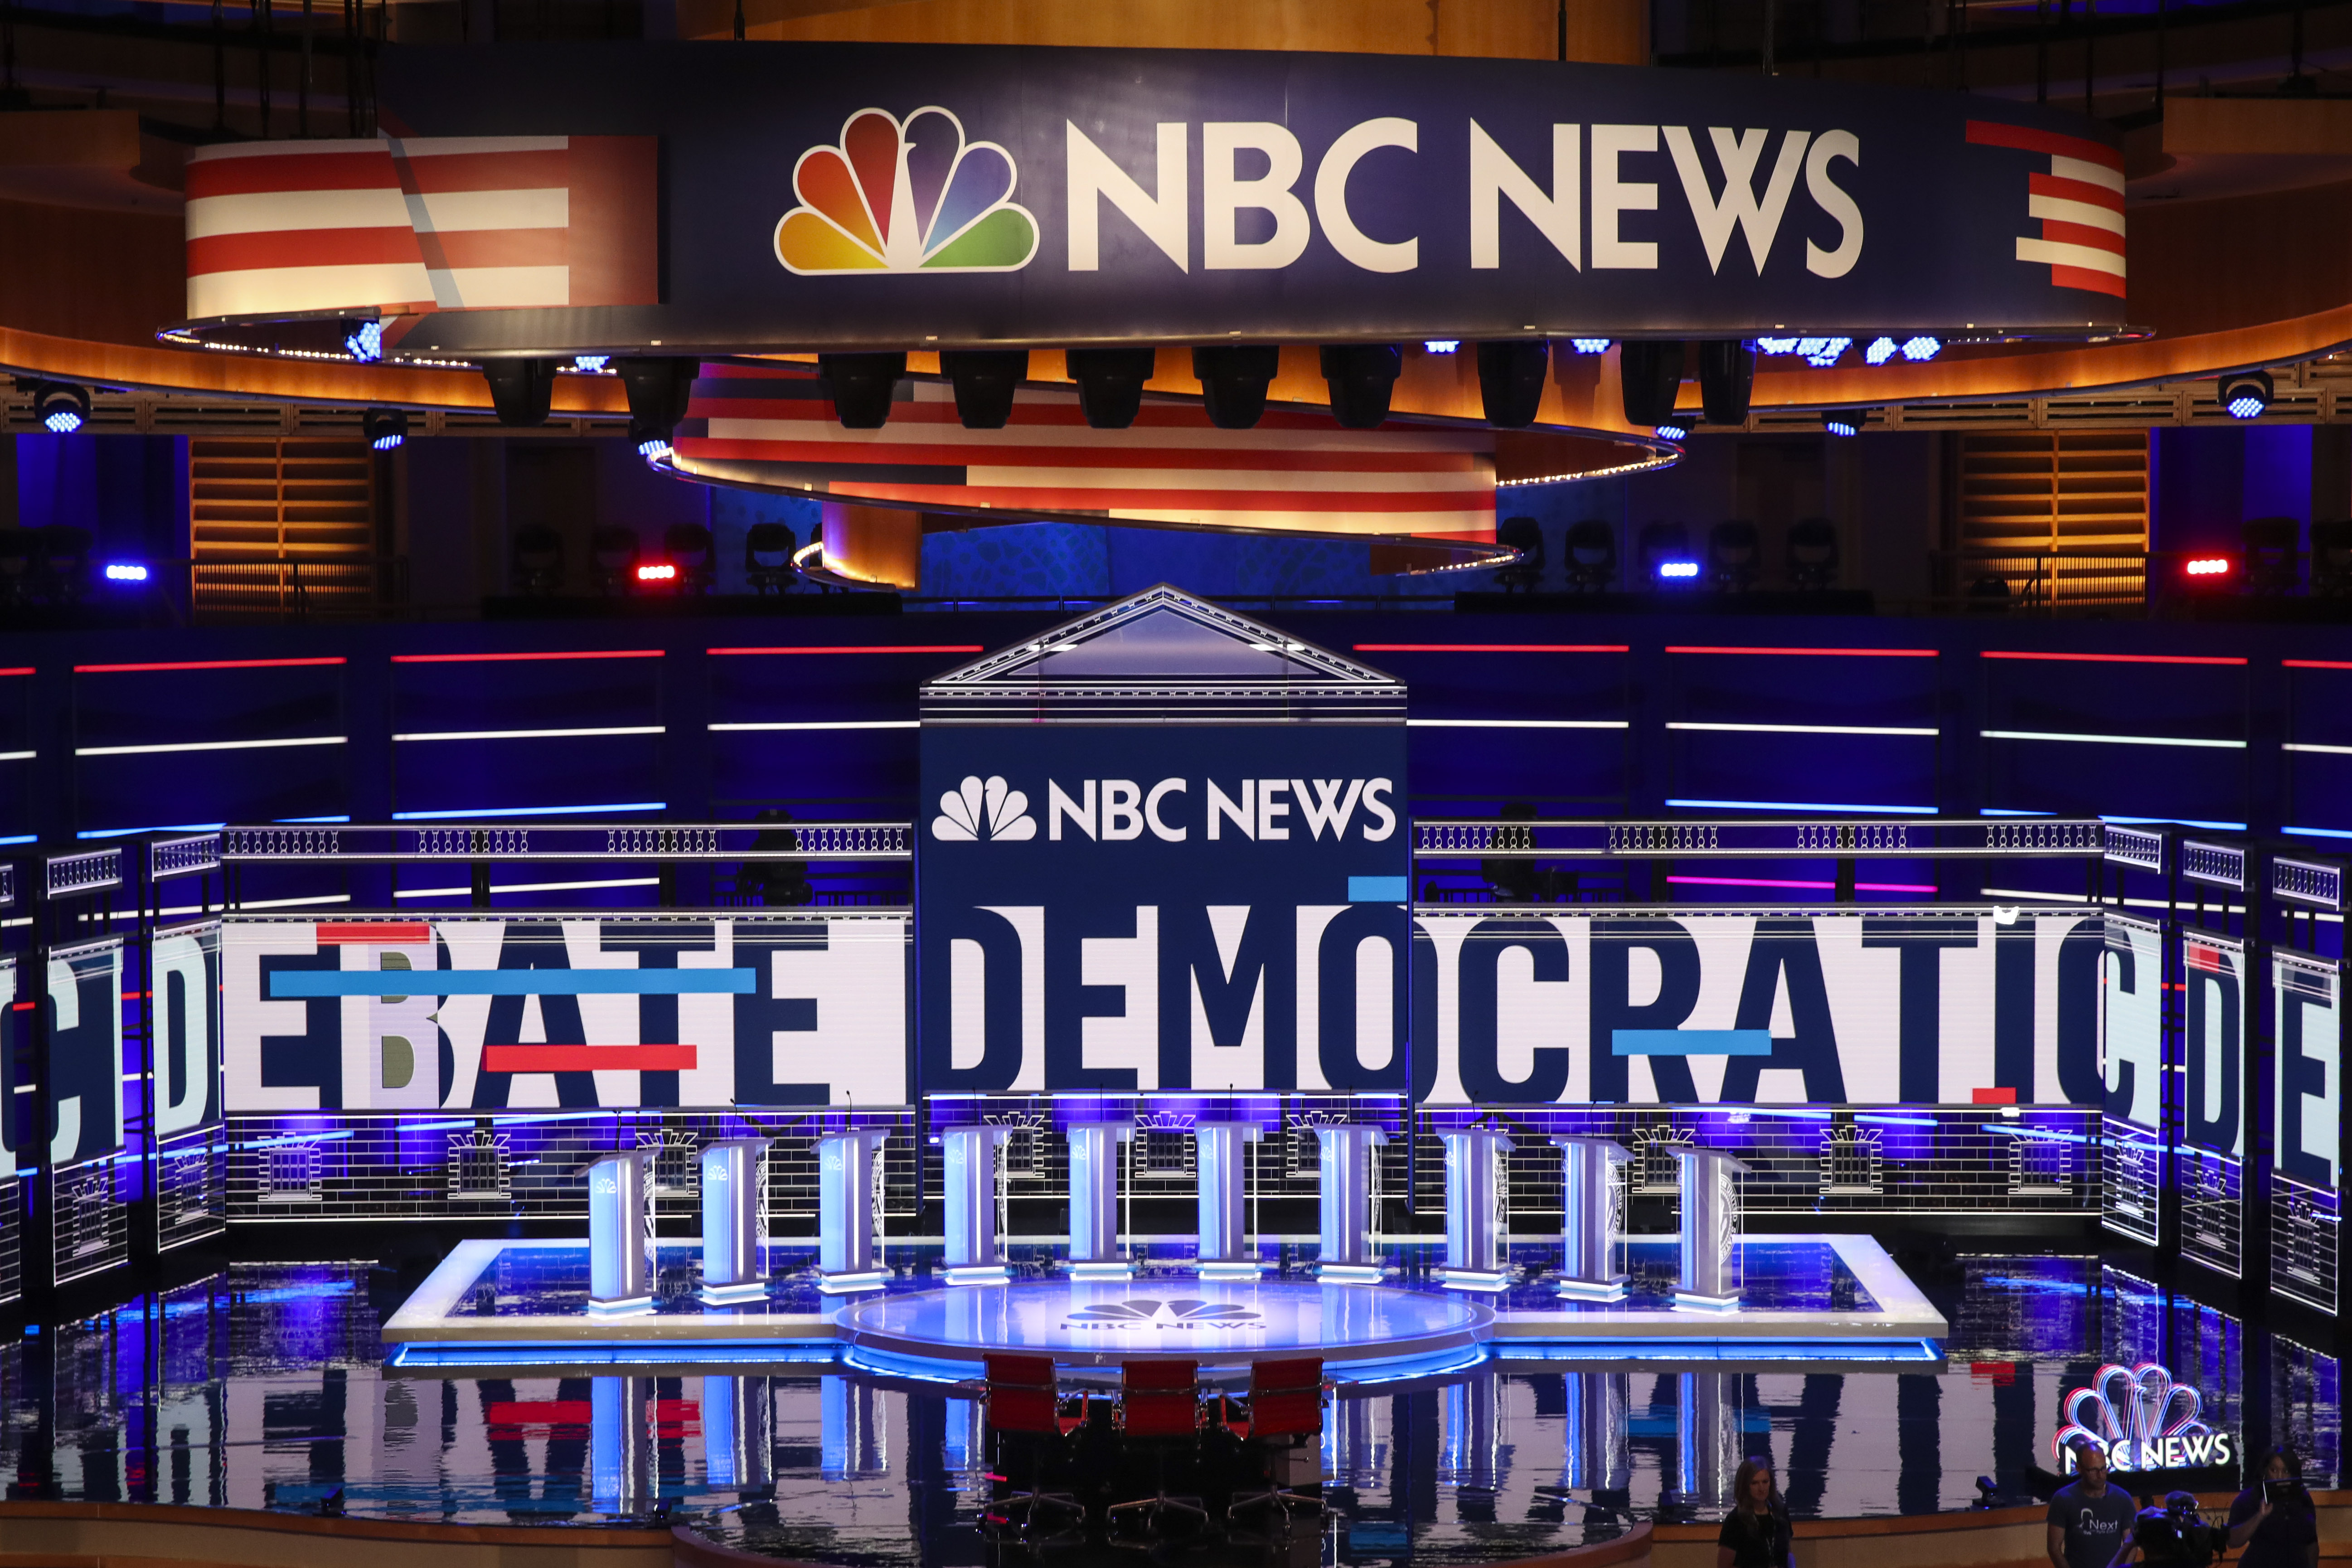 The stage is set for the first 2020 Democratic debate